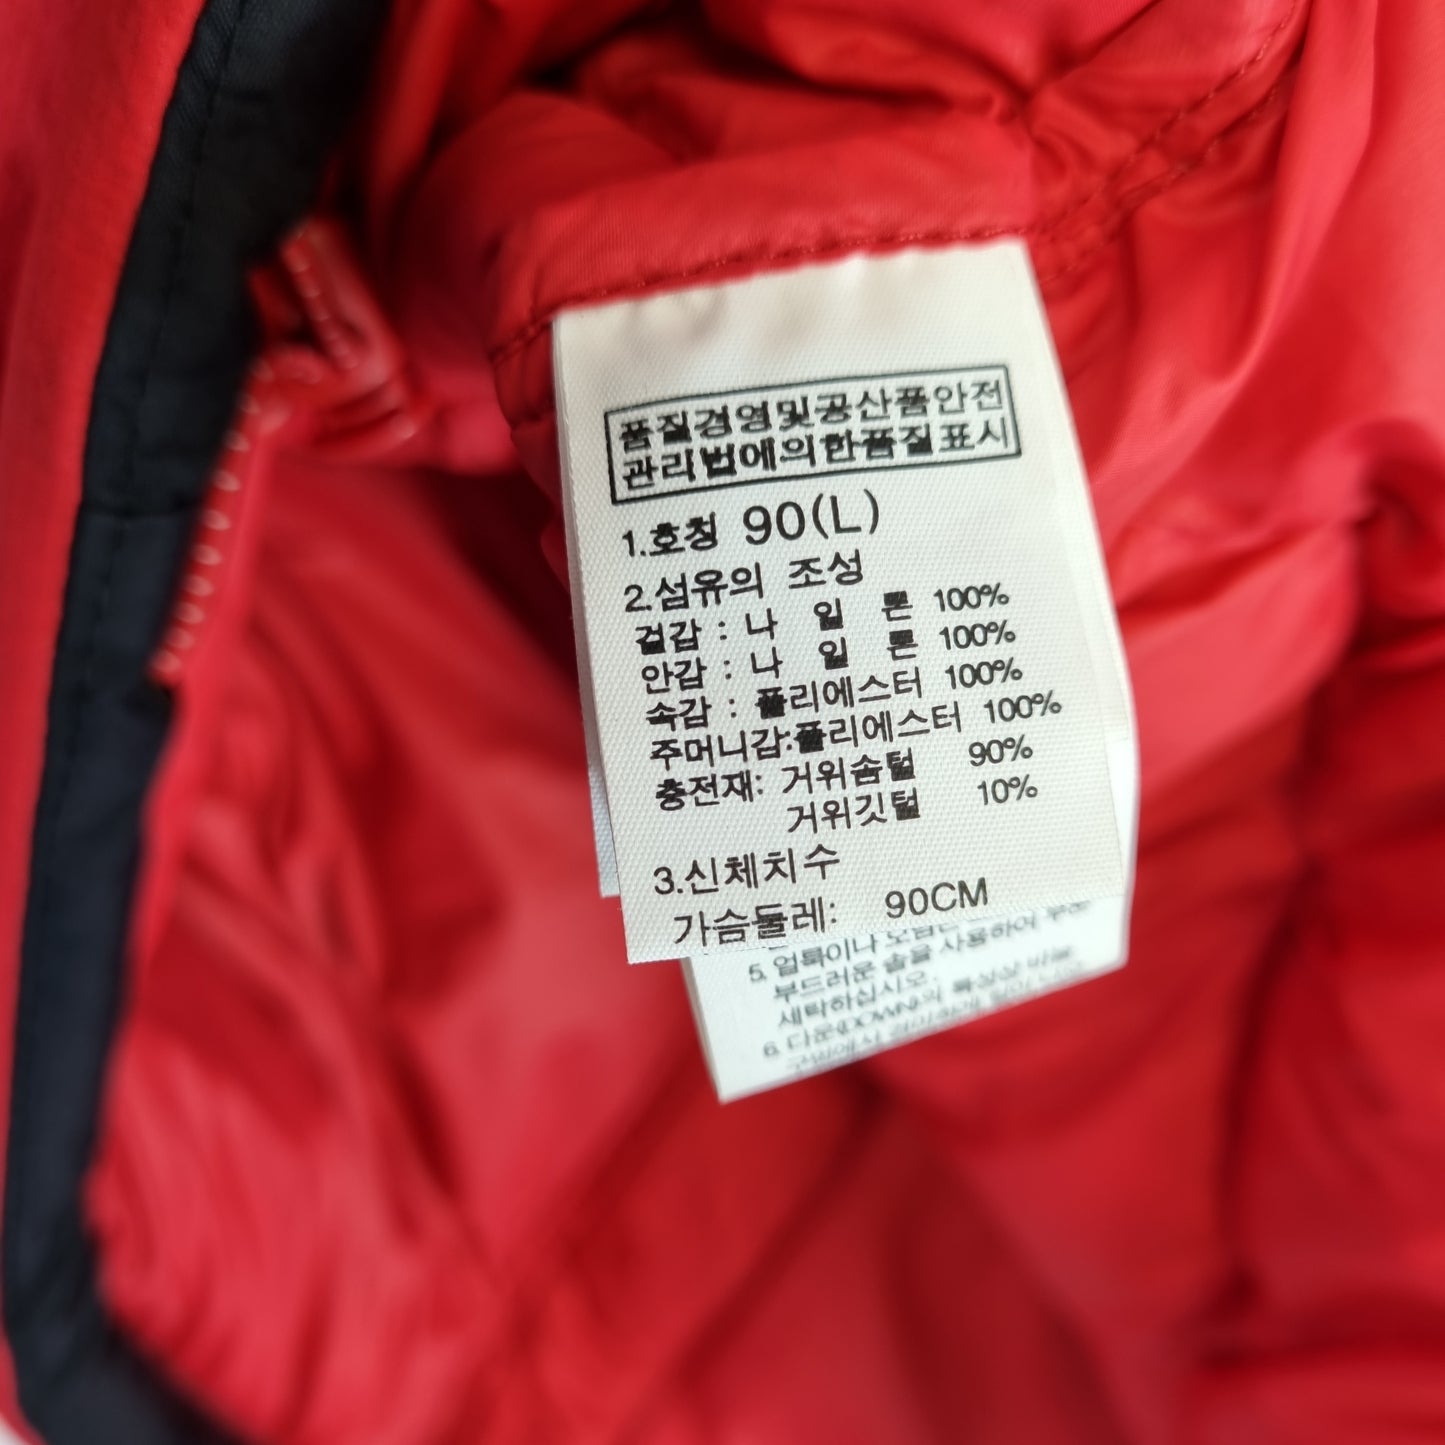 The North Face 800 Puffer (M)